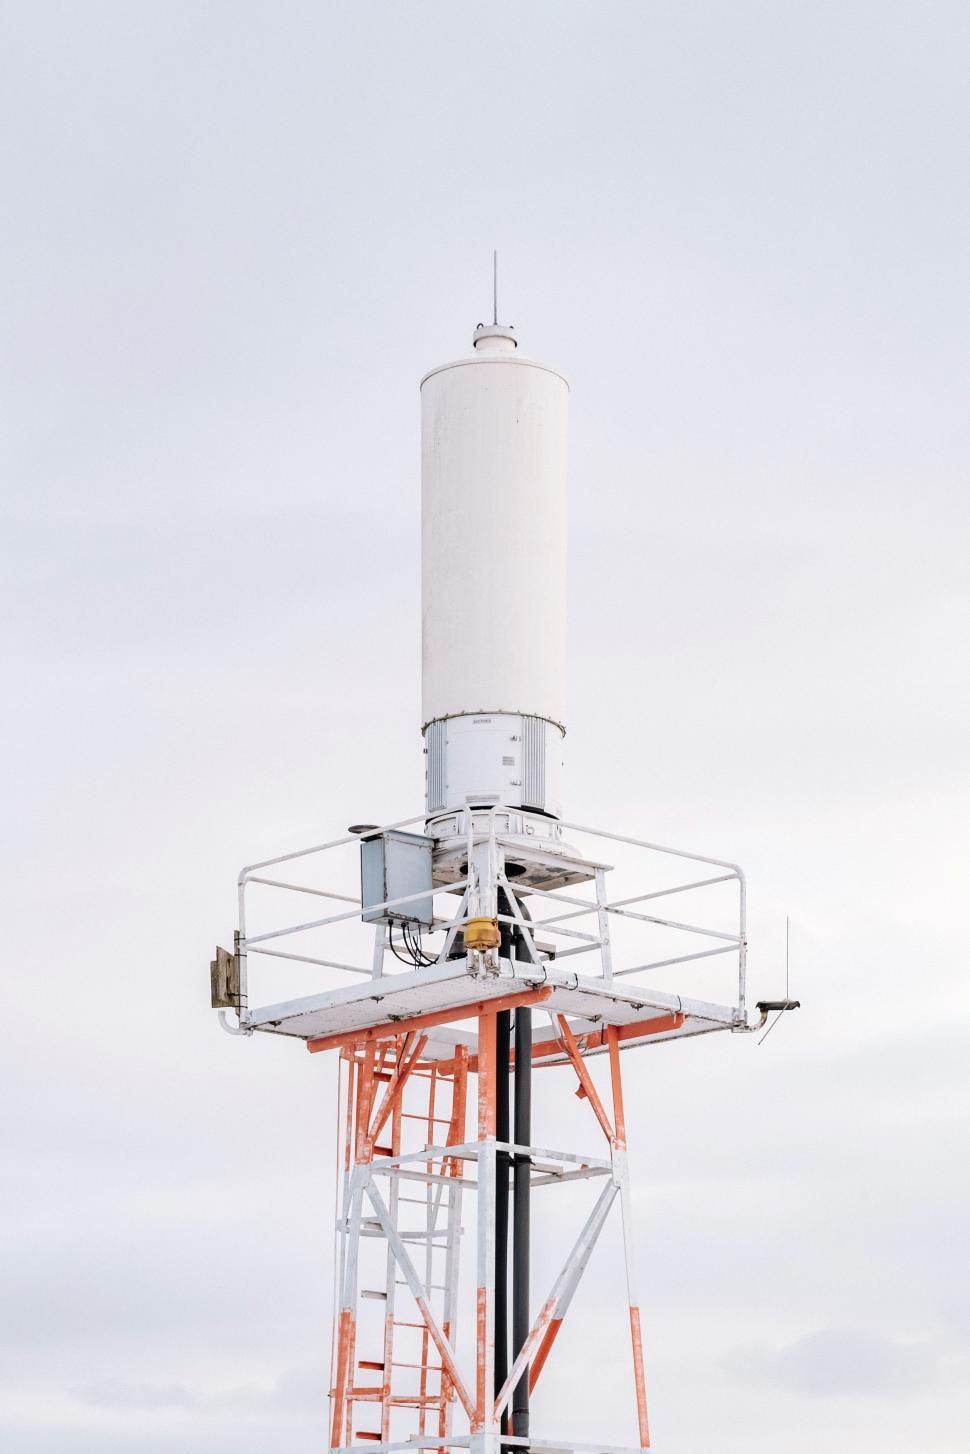 Free Image of White and Orange Tower Against Sky 